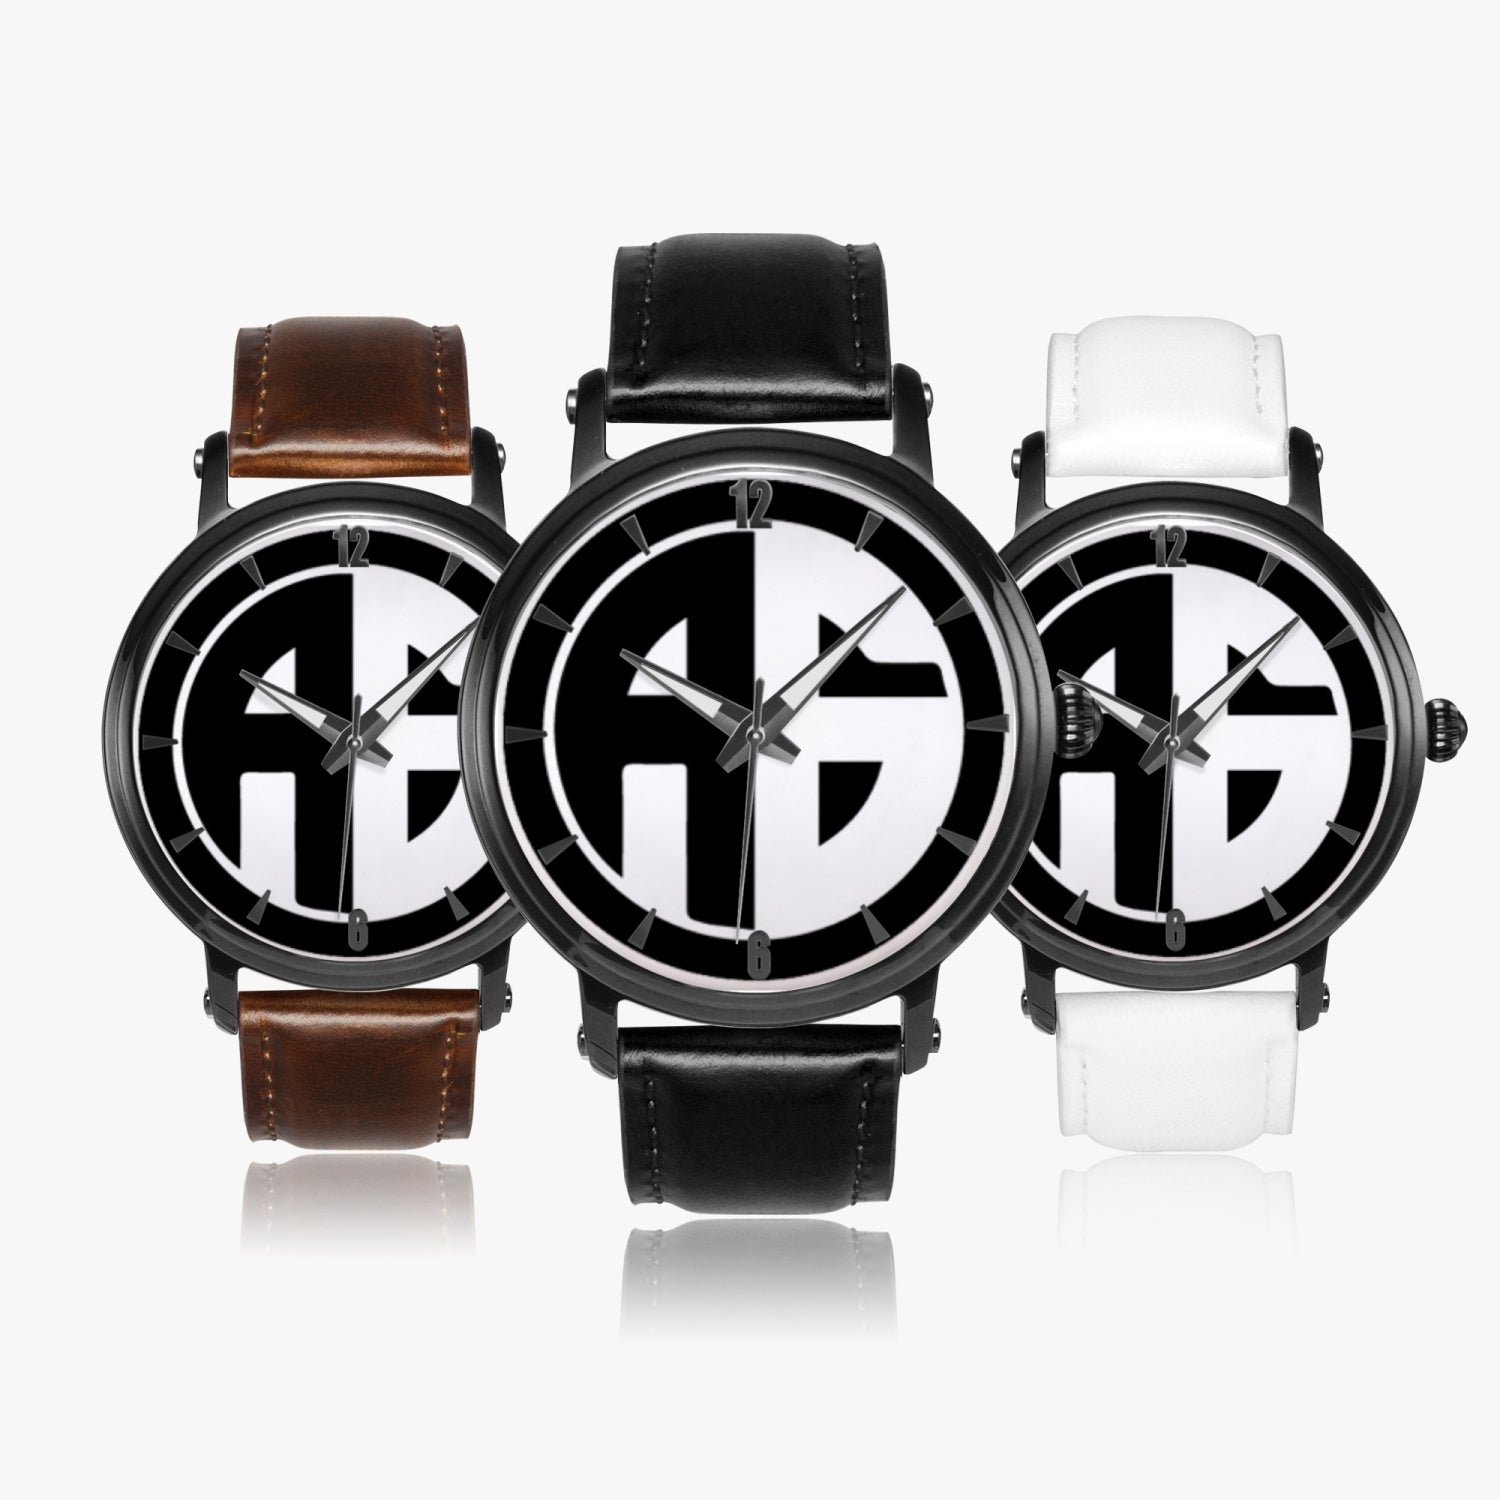 Three style of AG Conscious Classic watches